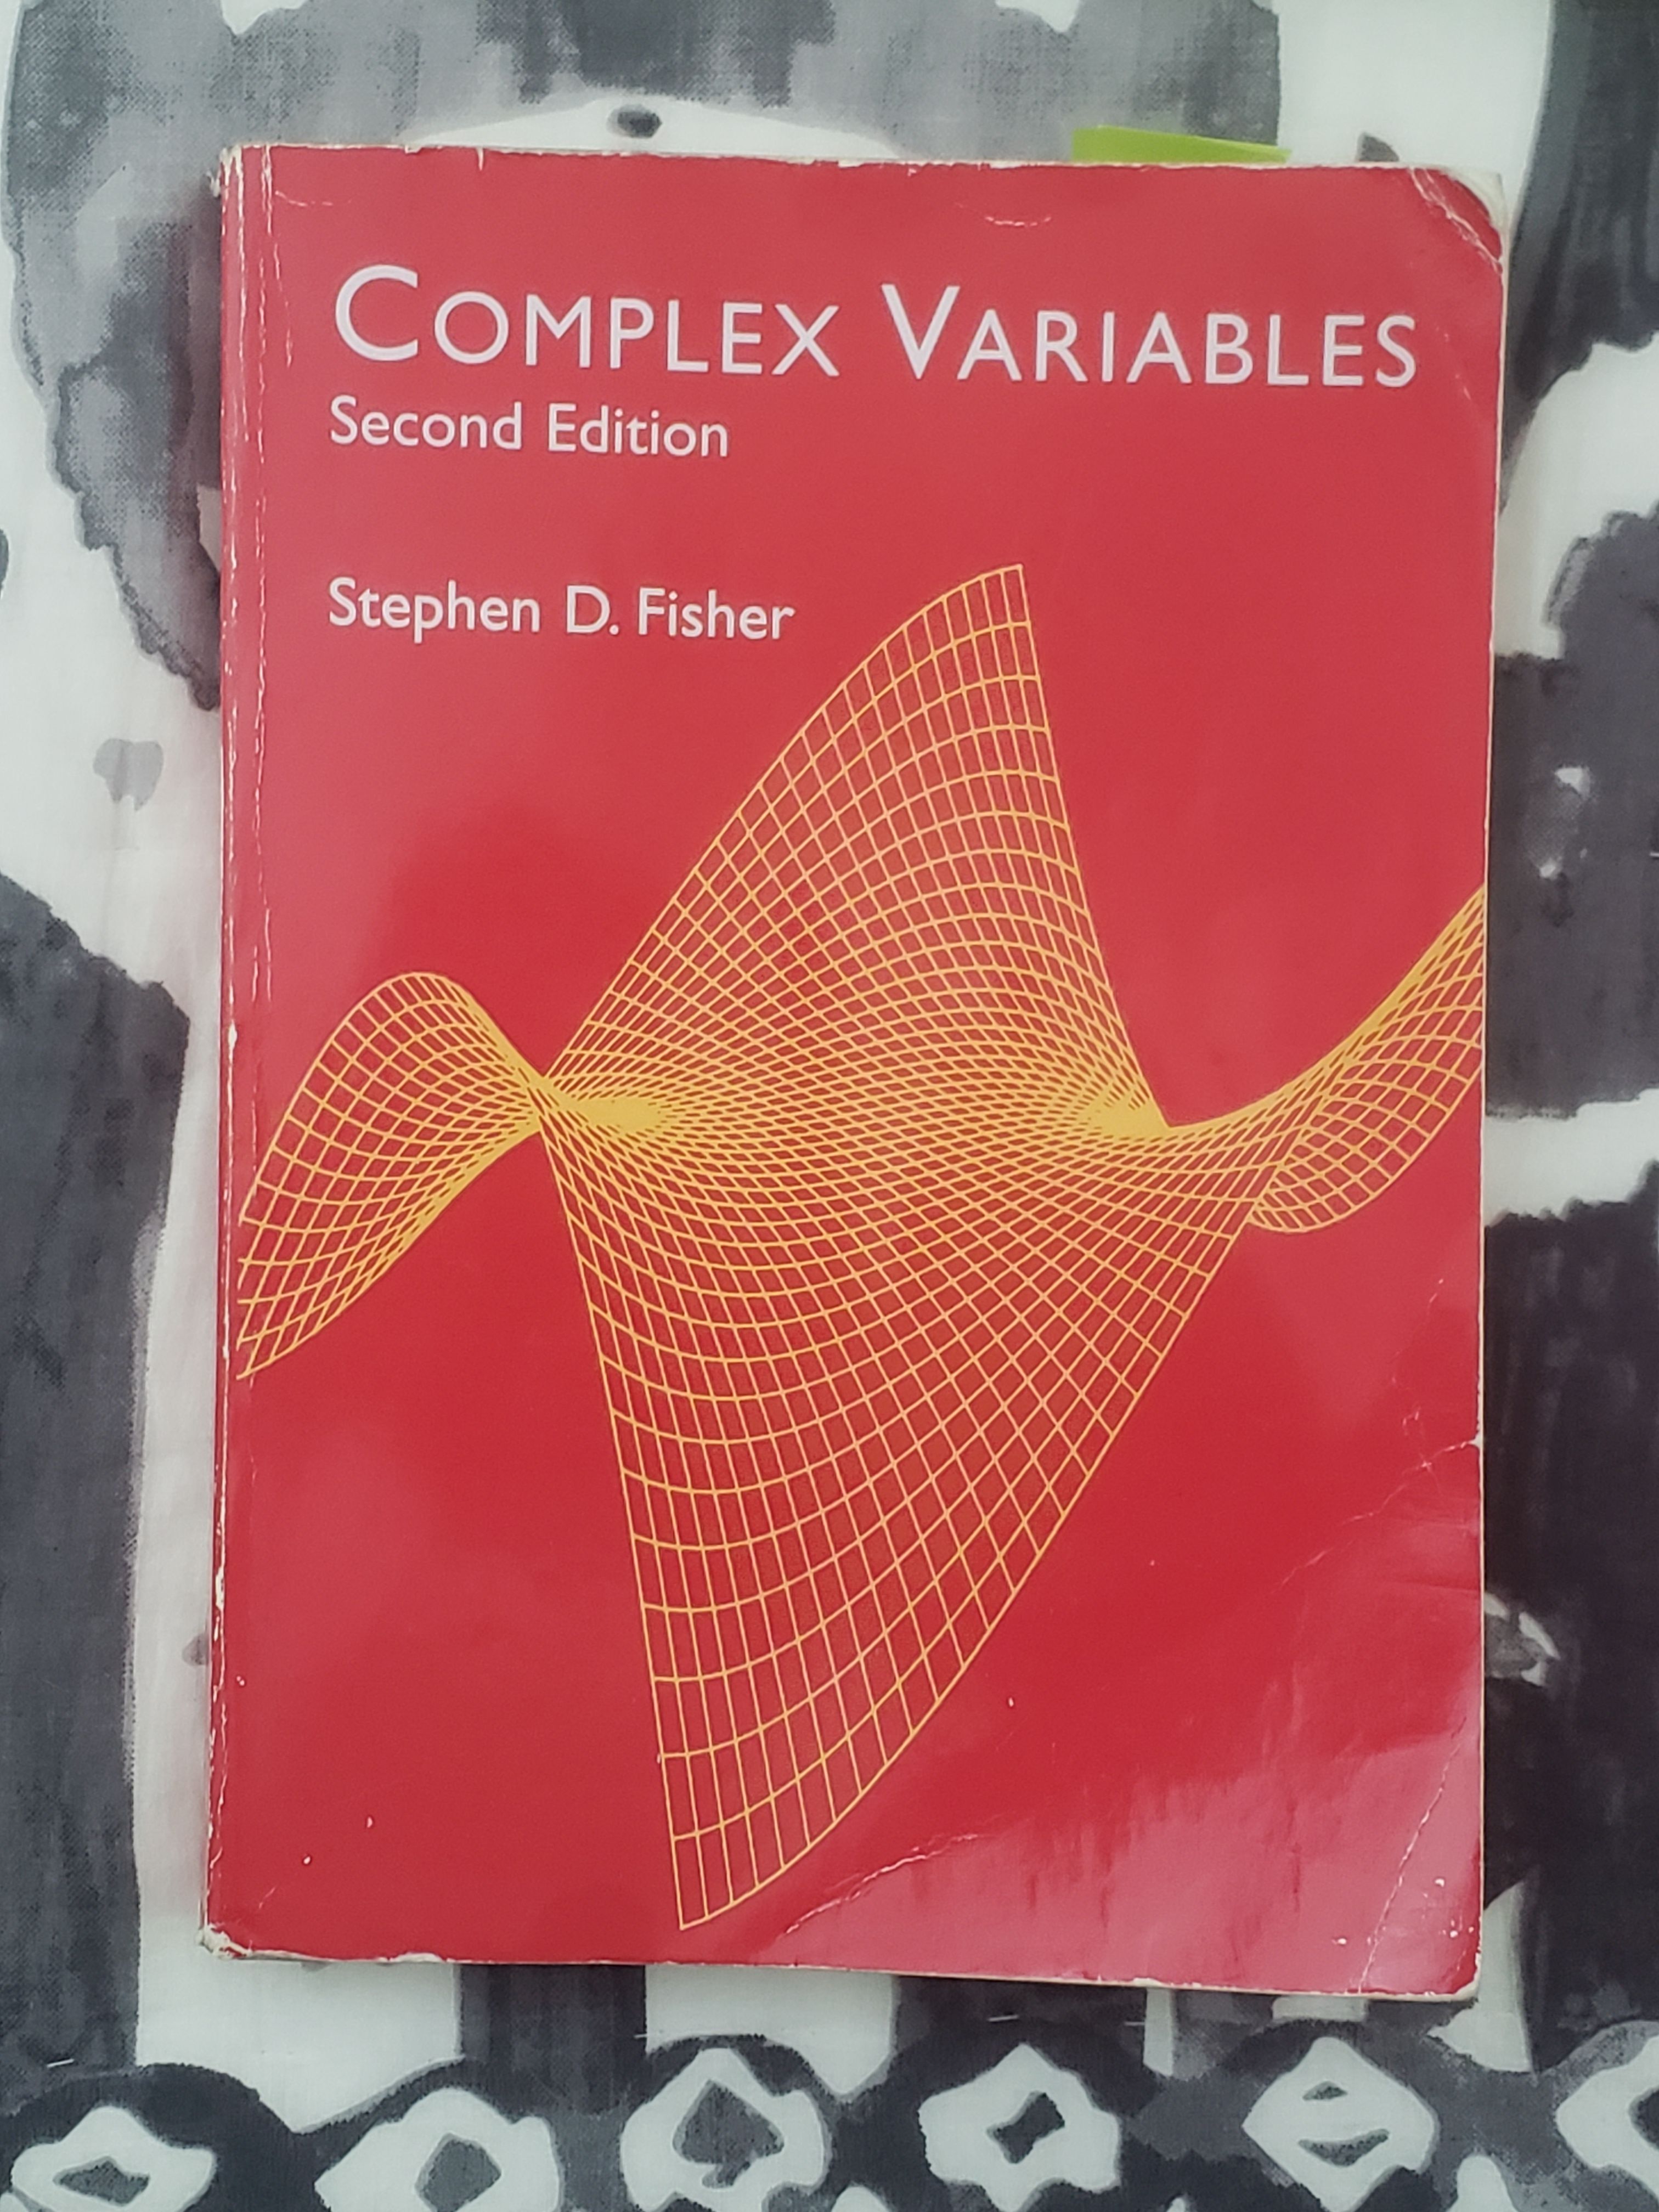 “Complex Analysis” Second Edition by Stephen D. Fisher, Dover Publications